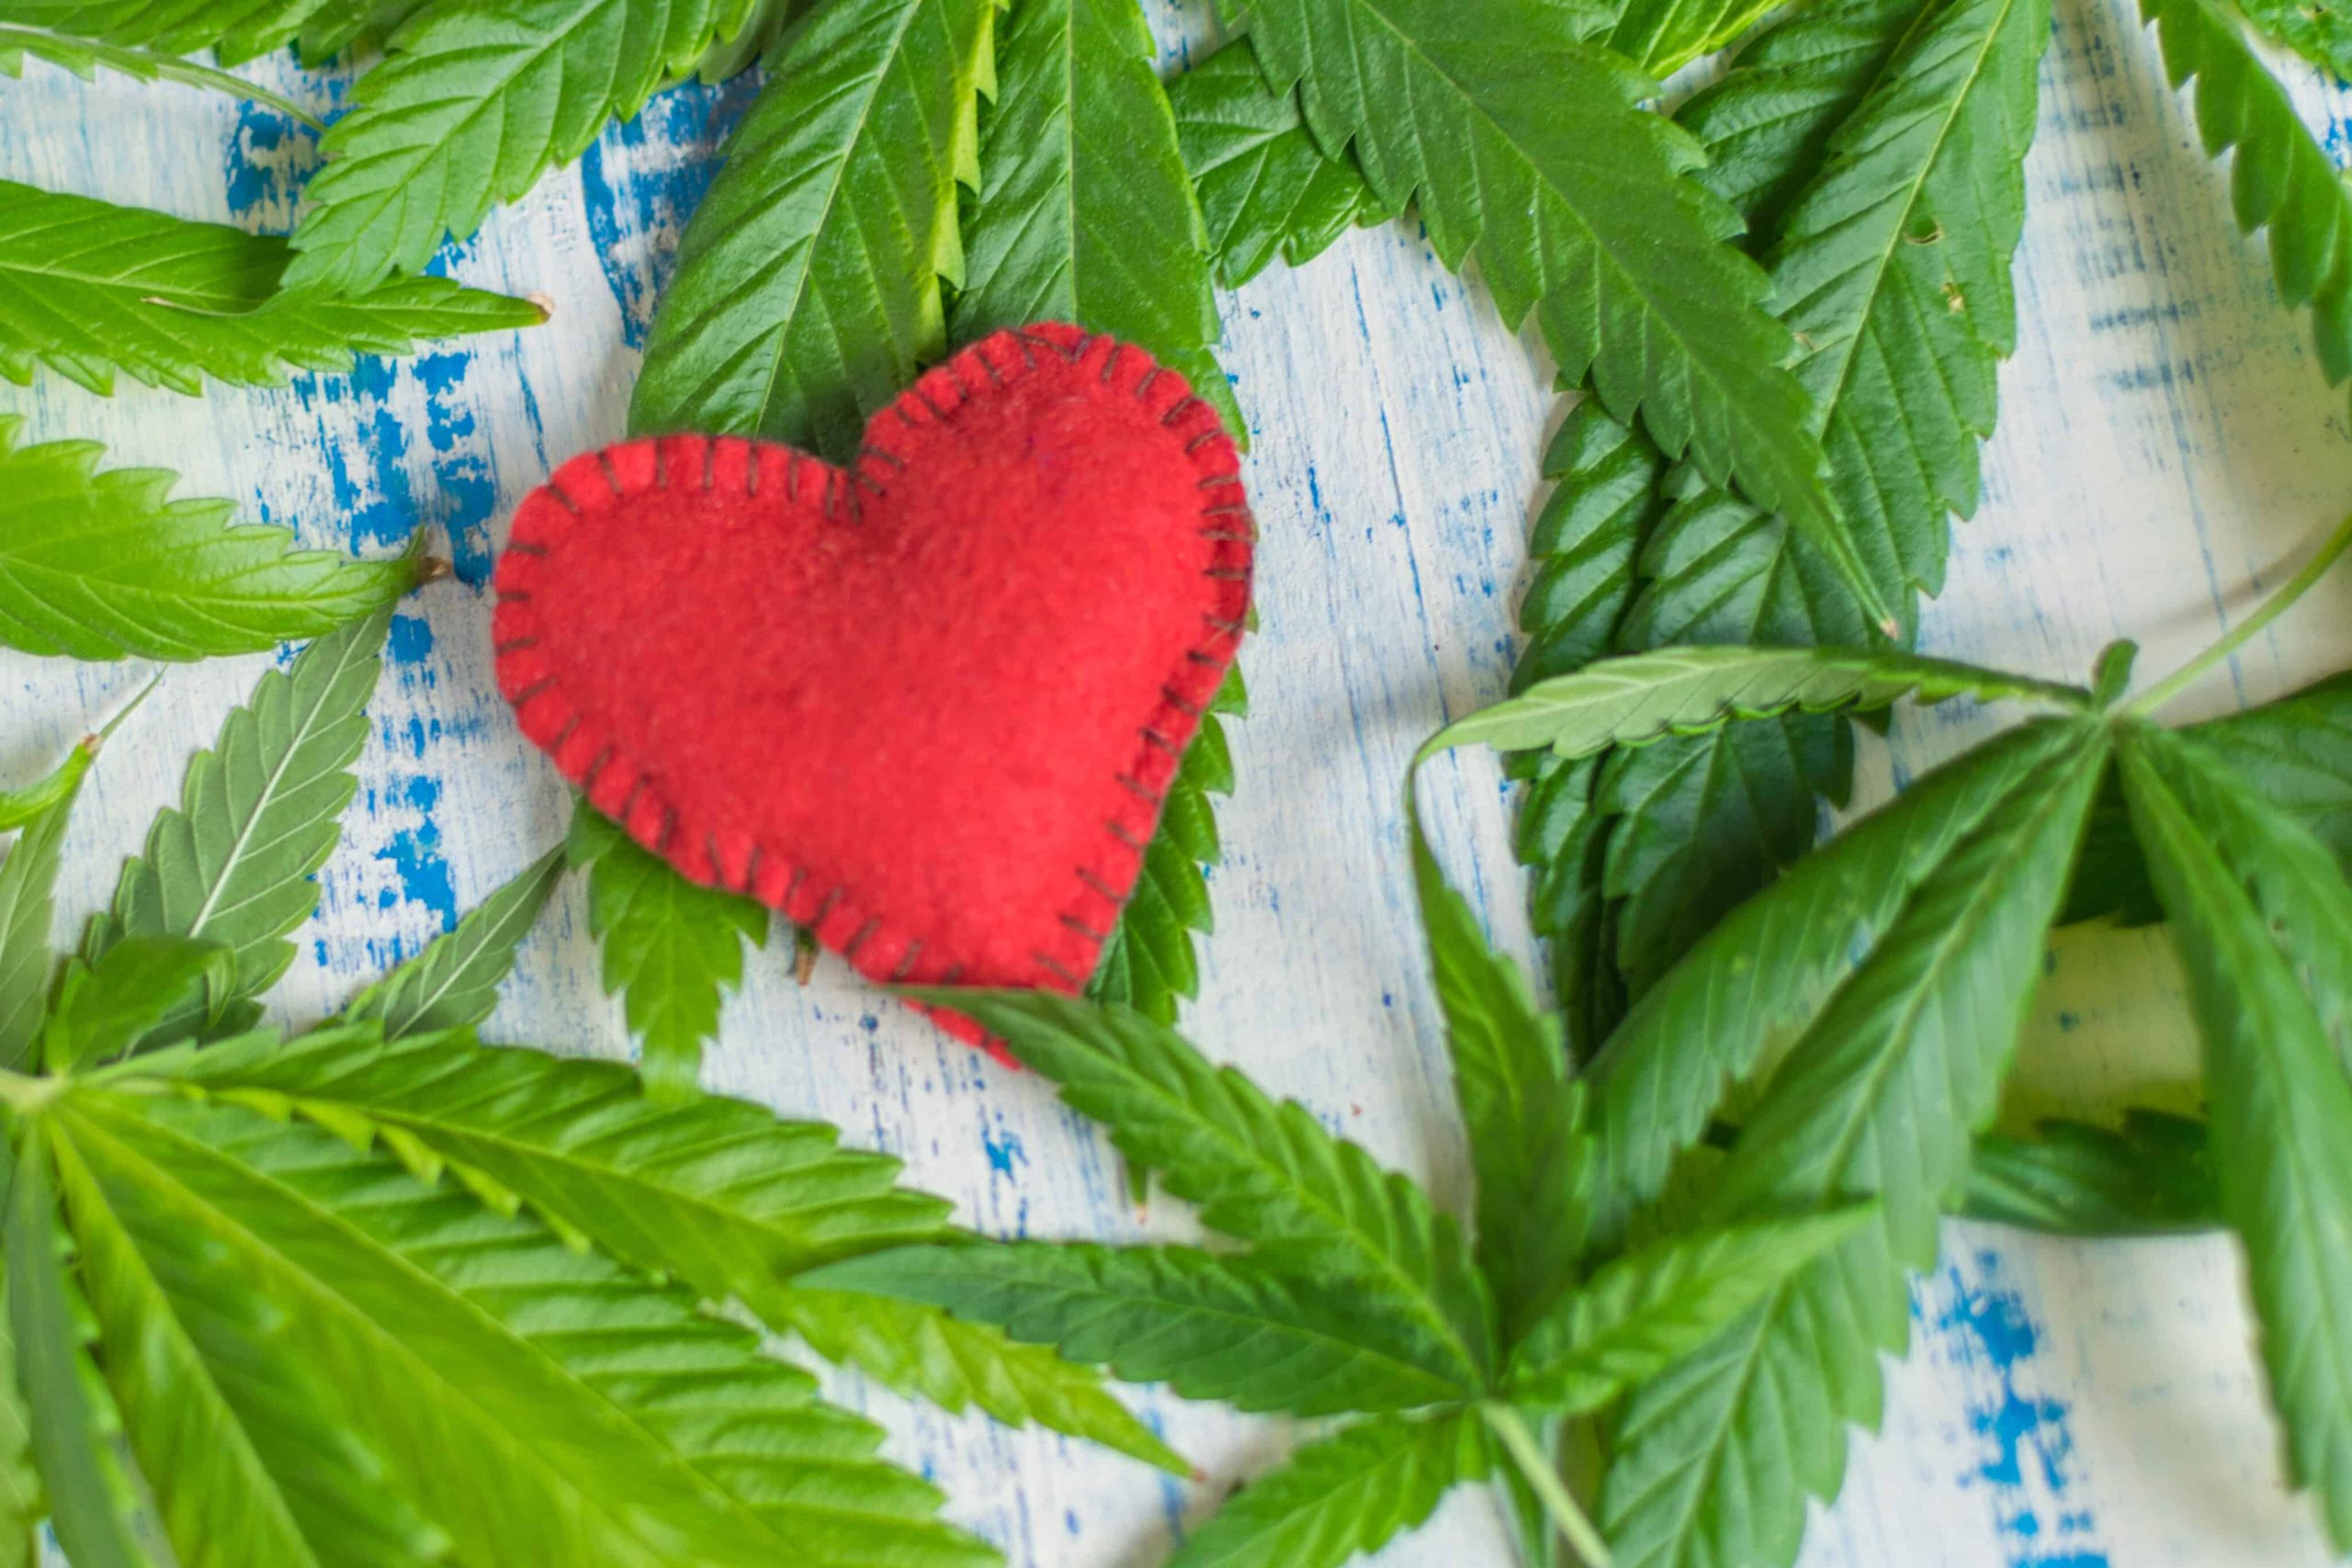 Cannabis Use Not Associated with Greater Risk of Heart Attack, Study Finds